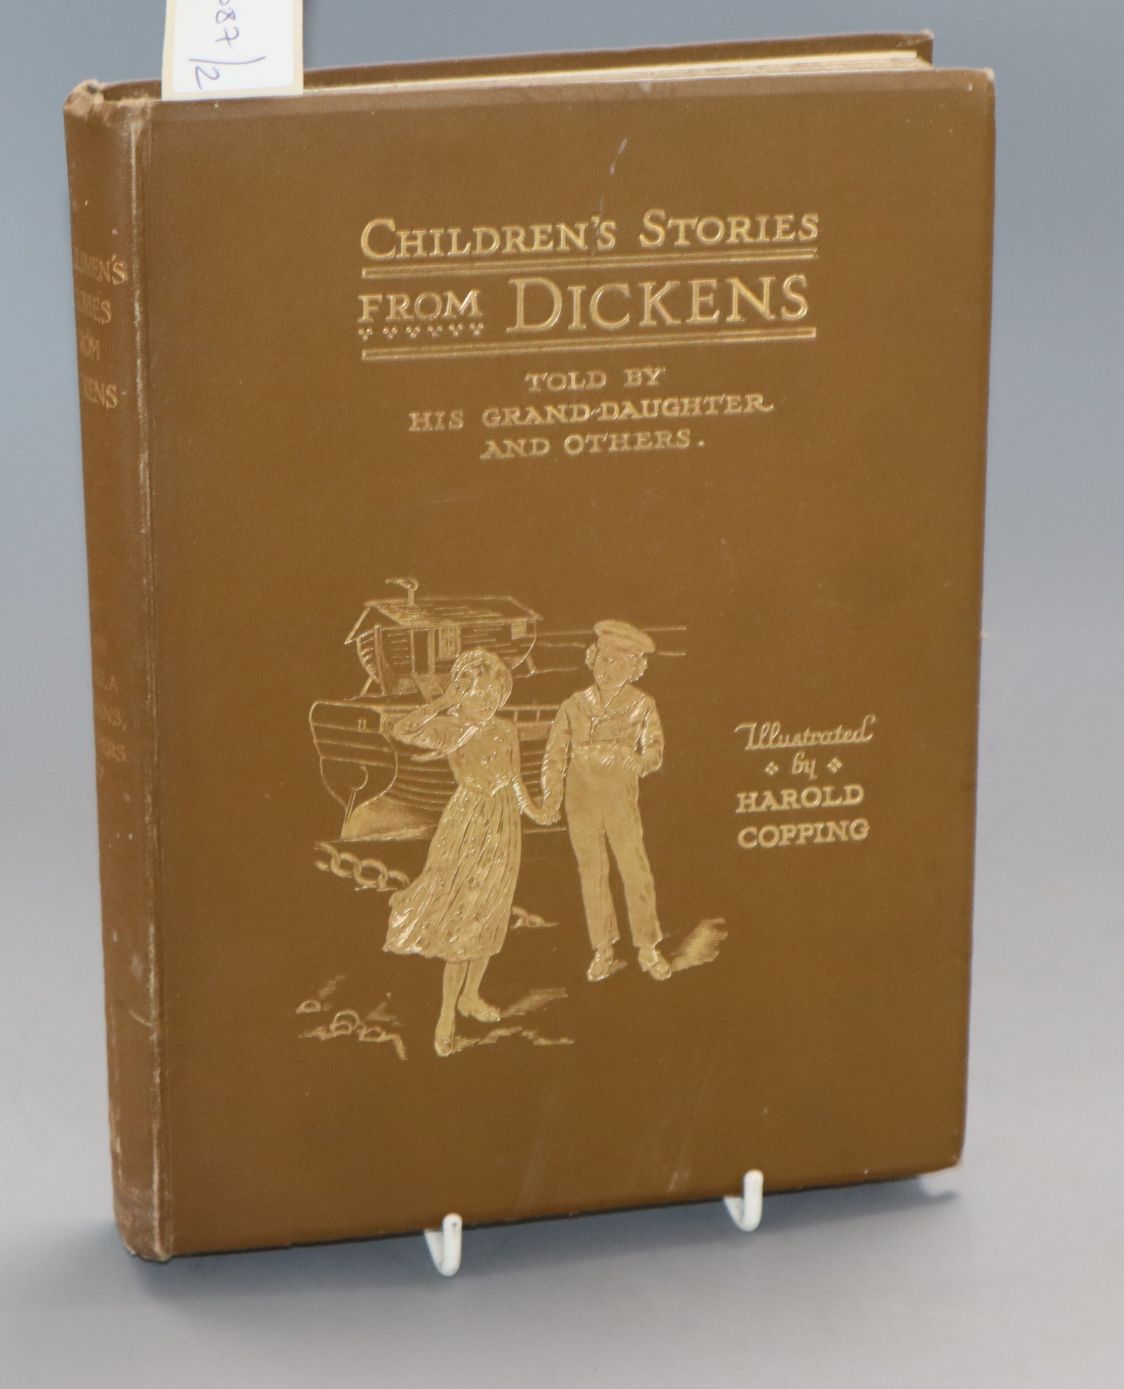 A Charles Dickens centenary book, signed by Charles Dickens 5 granddaughters